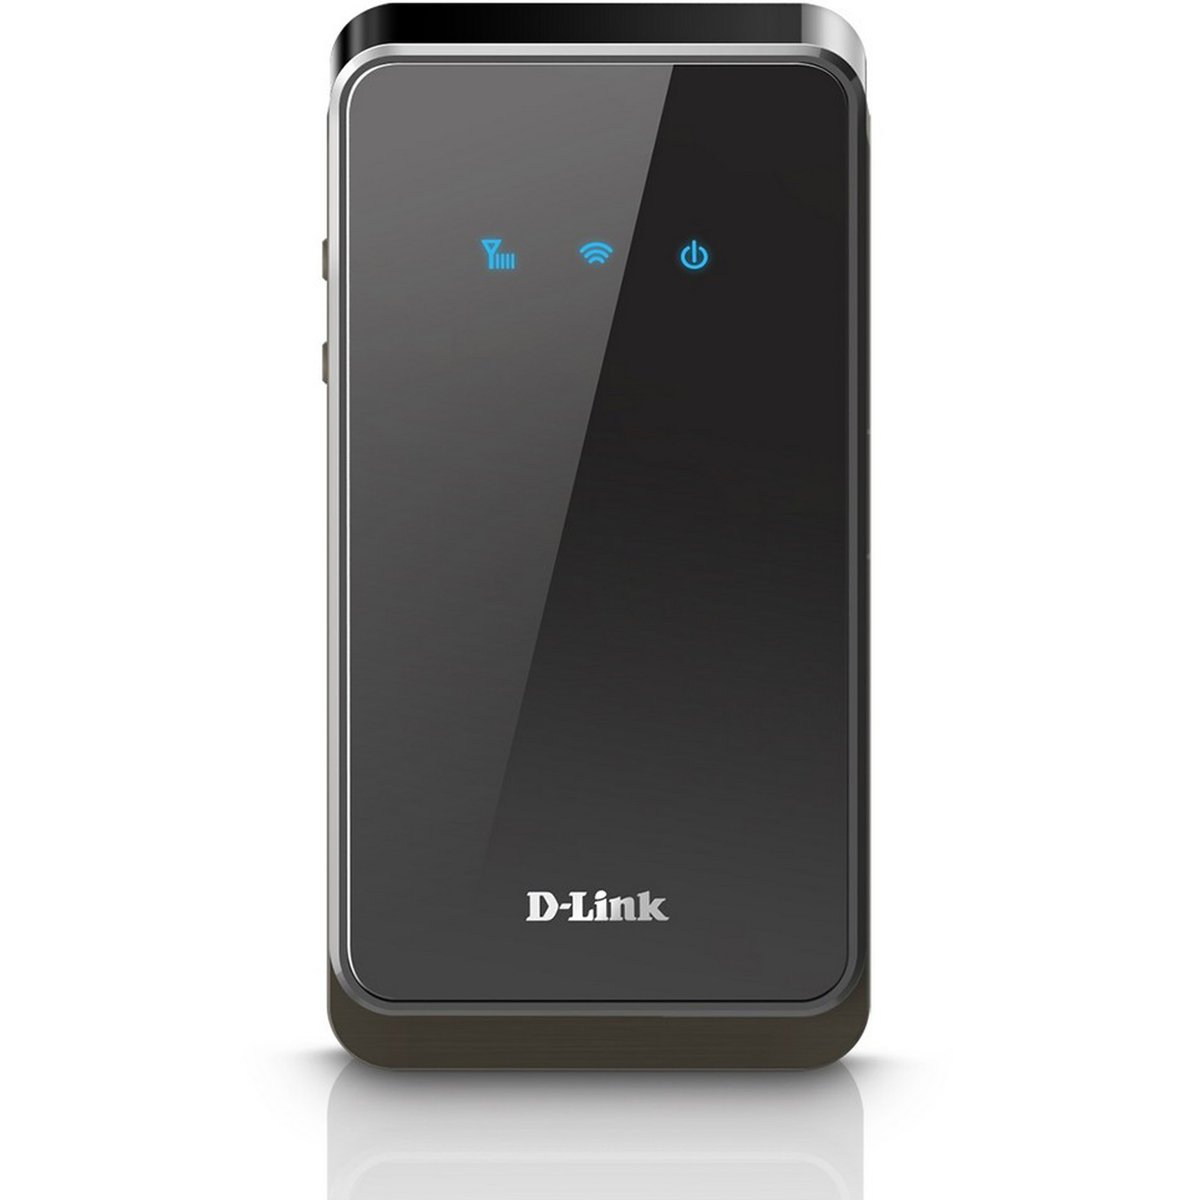 D-Link 3G wifi Mobile router DWR720